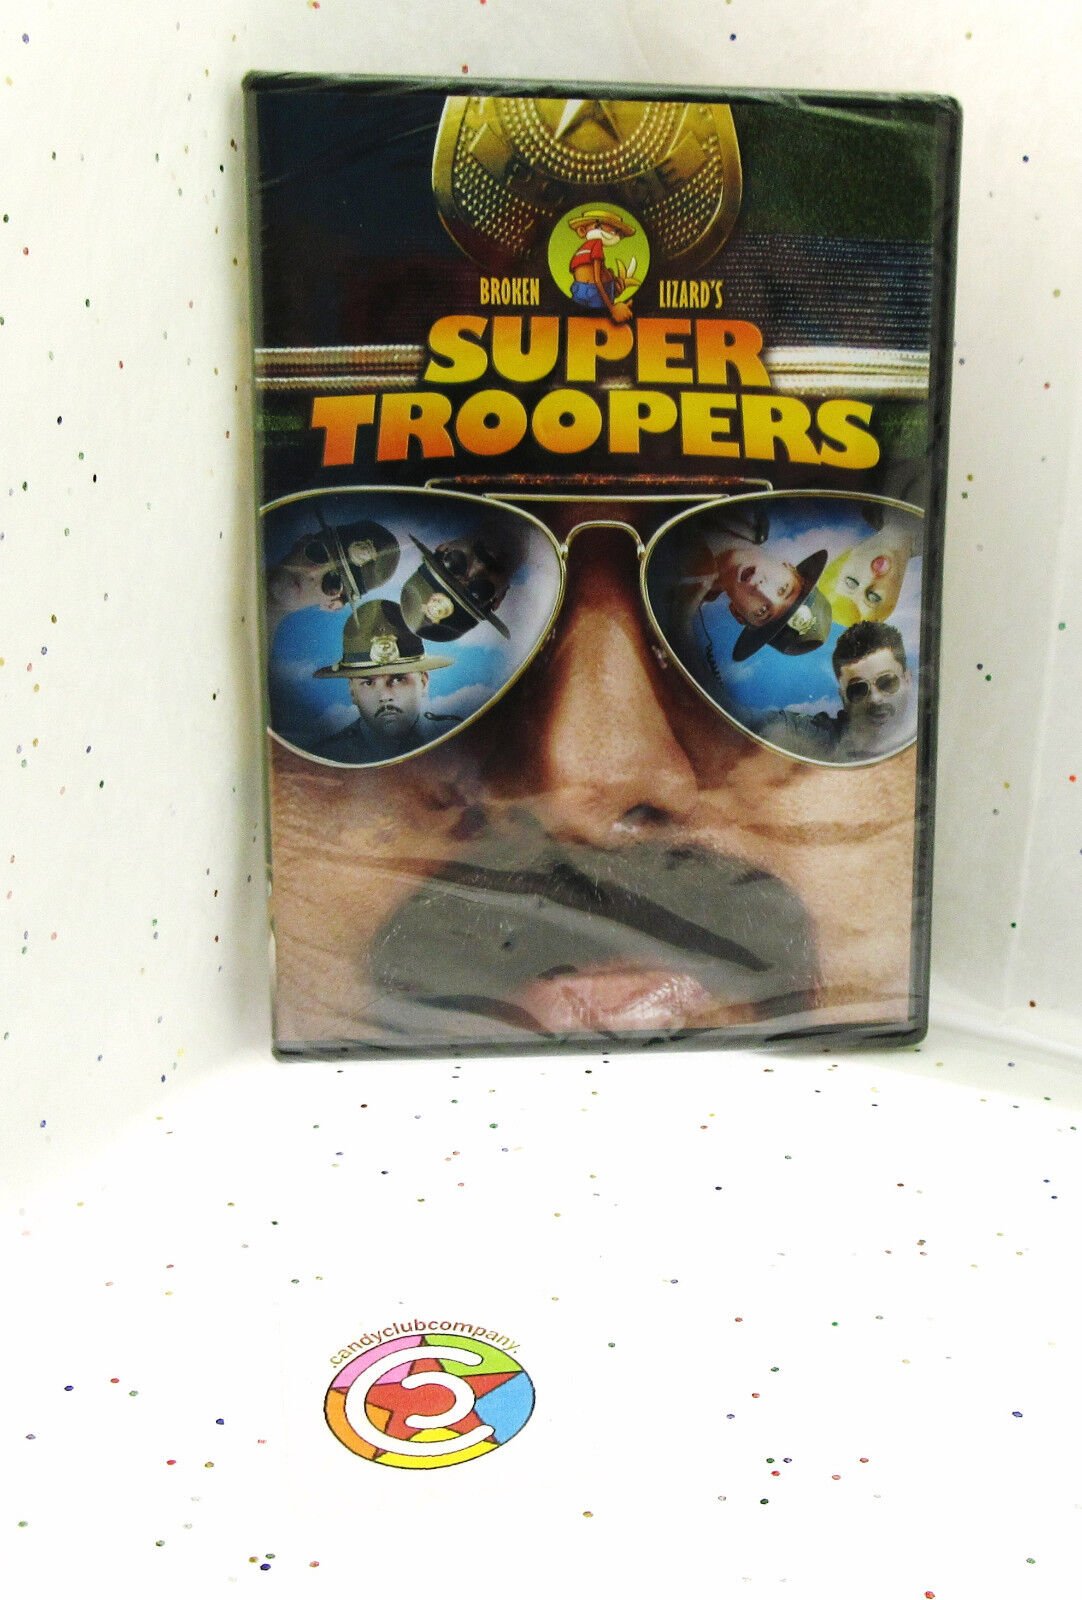 Super Troopers ~ The Original ~ 2001~ Movie Comedy ~ New DVD